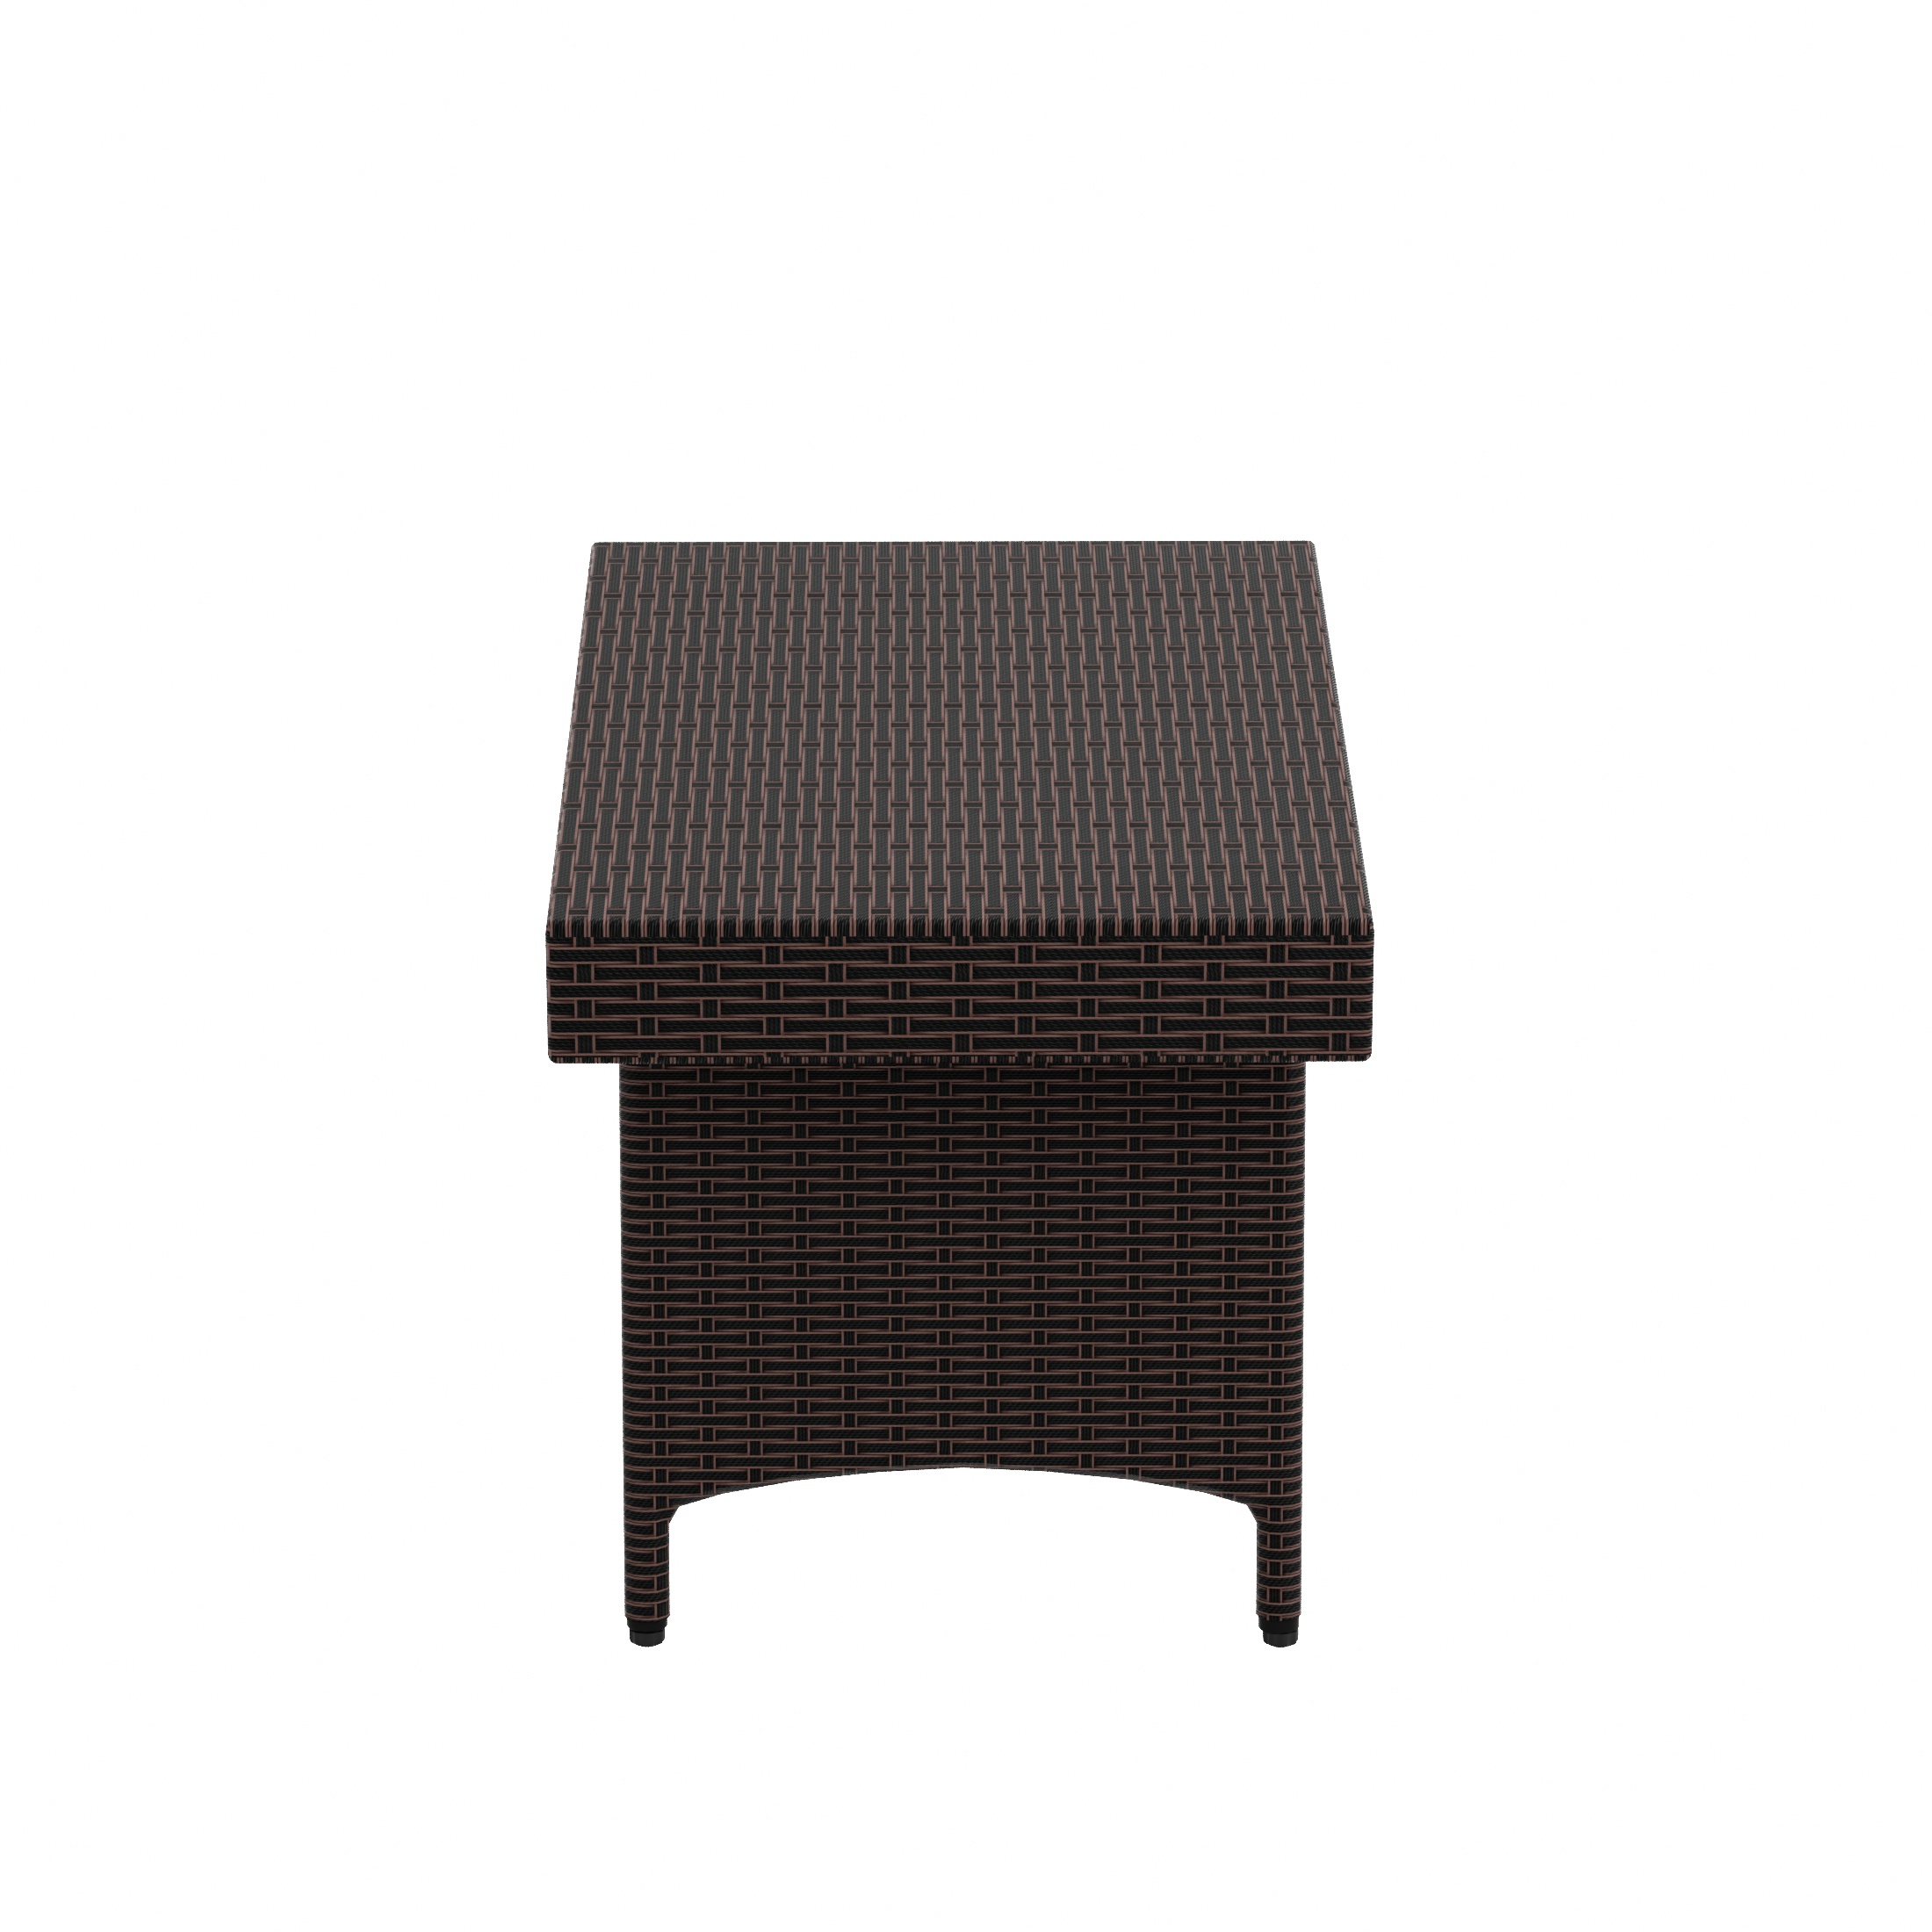 WestinTrends Coastal Outdoor Folding Side Table, 23" x 15" All Weather PE Rattan Wicker Small Patio Table Portable Picnic Table, Chocolate - image 3 of 7